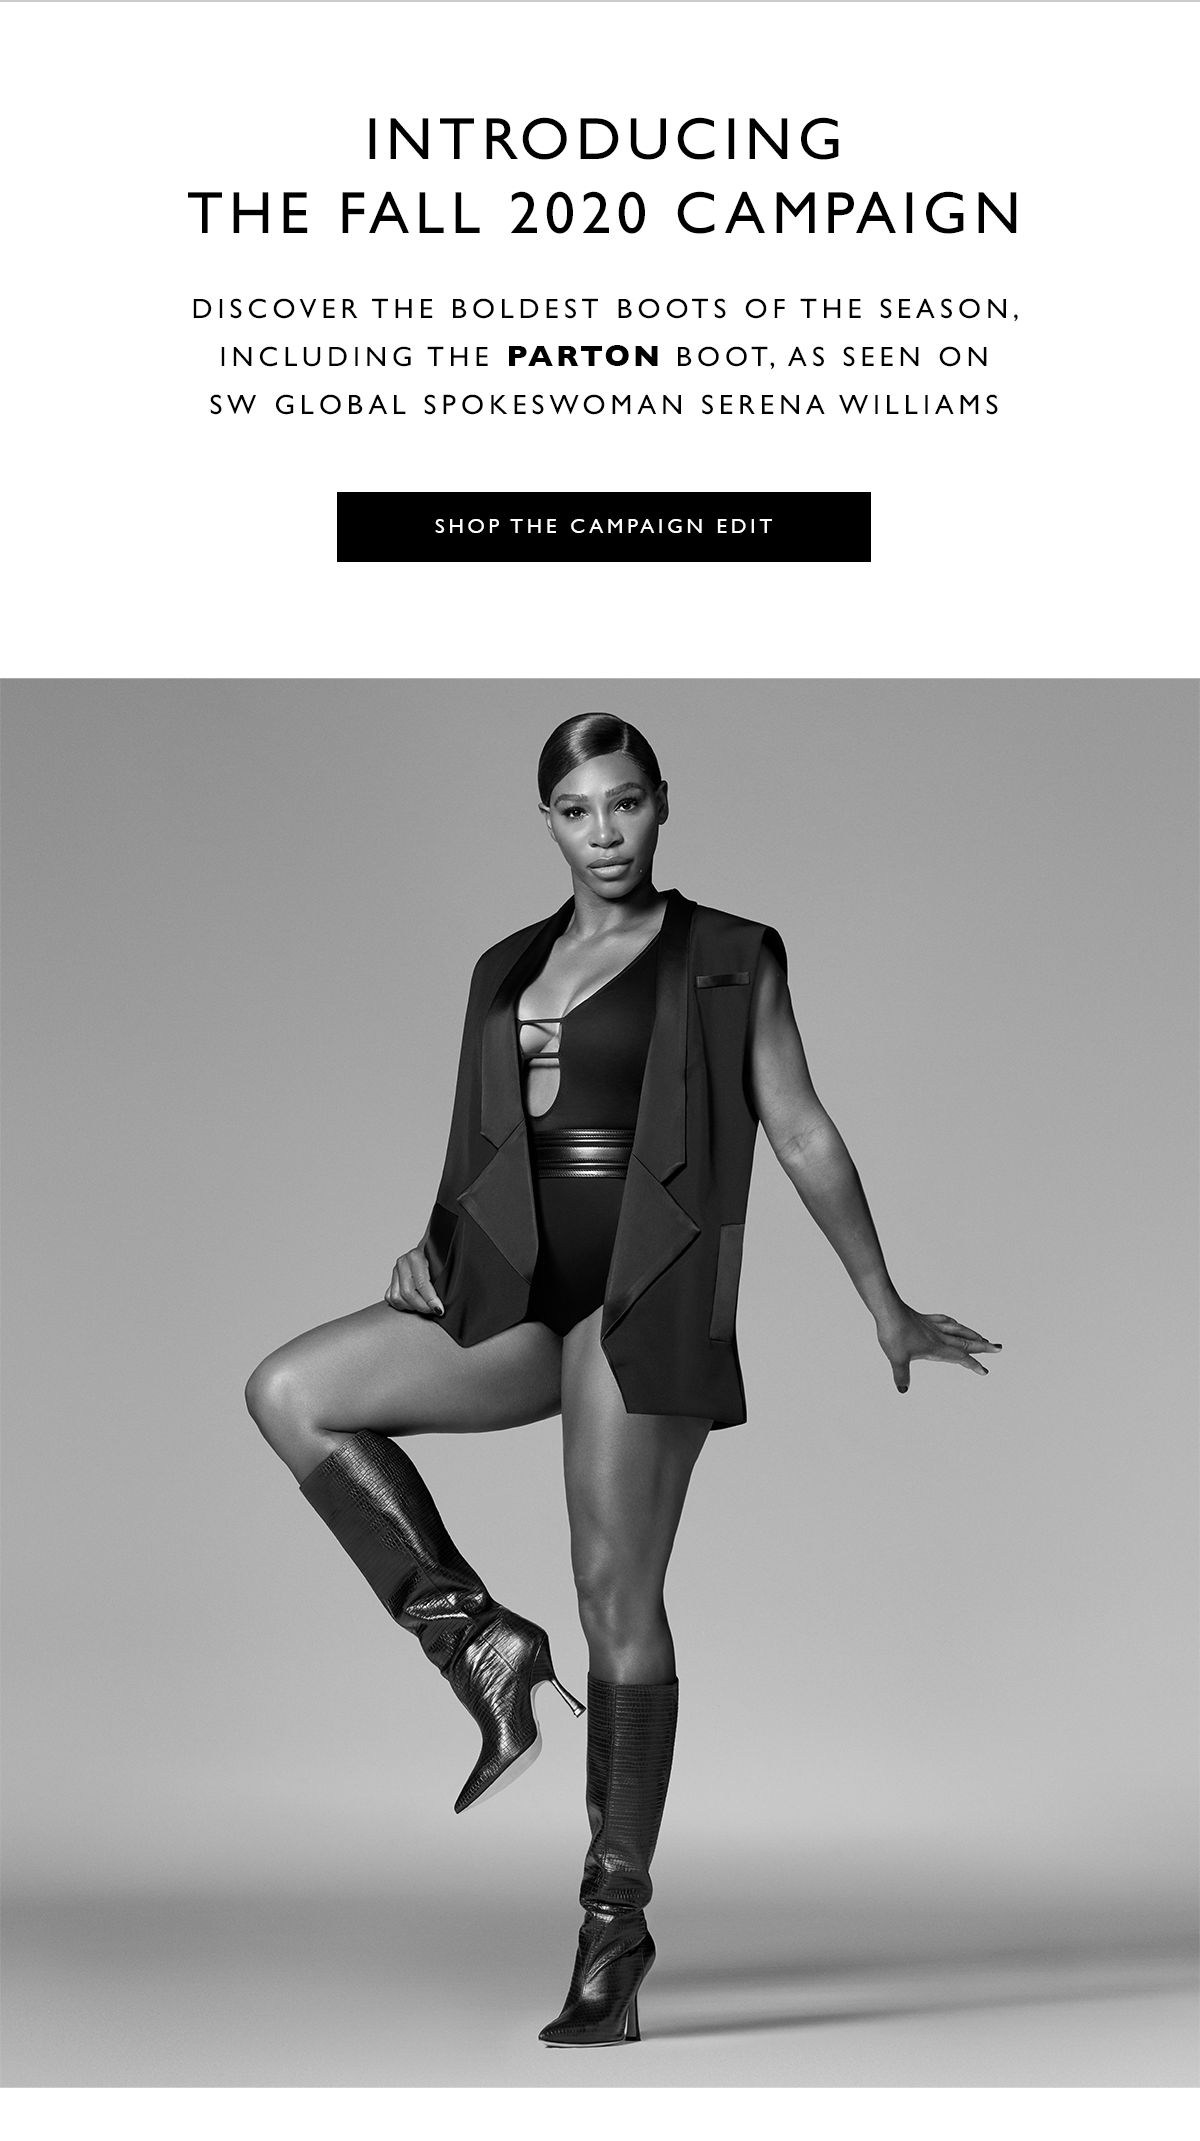 Introducing the Fall 2020 Campaign. Discover the boldest boots of the season, including the PARTON boot, as seen on SW Global Spokeswoman Serena Williams. SHOP THE CAMPAIGN EDIT 